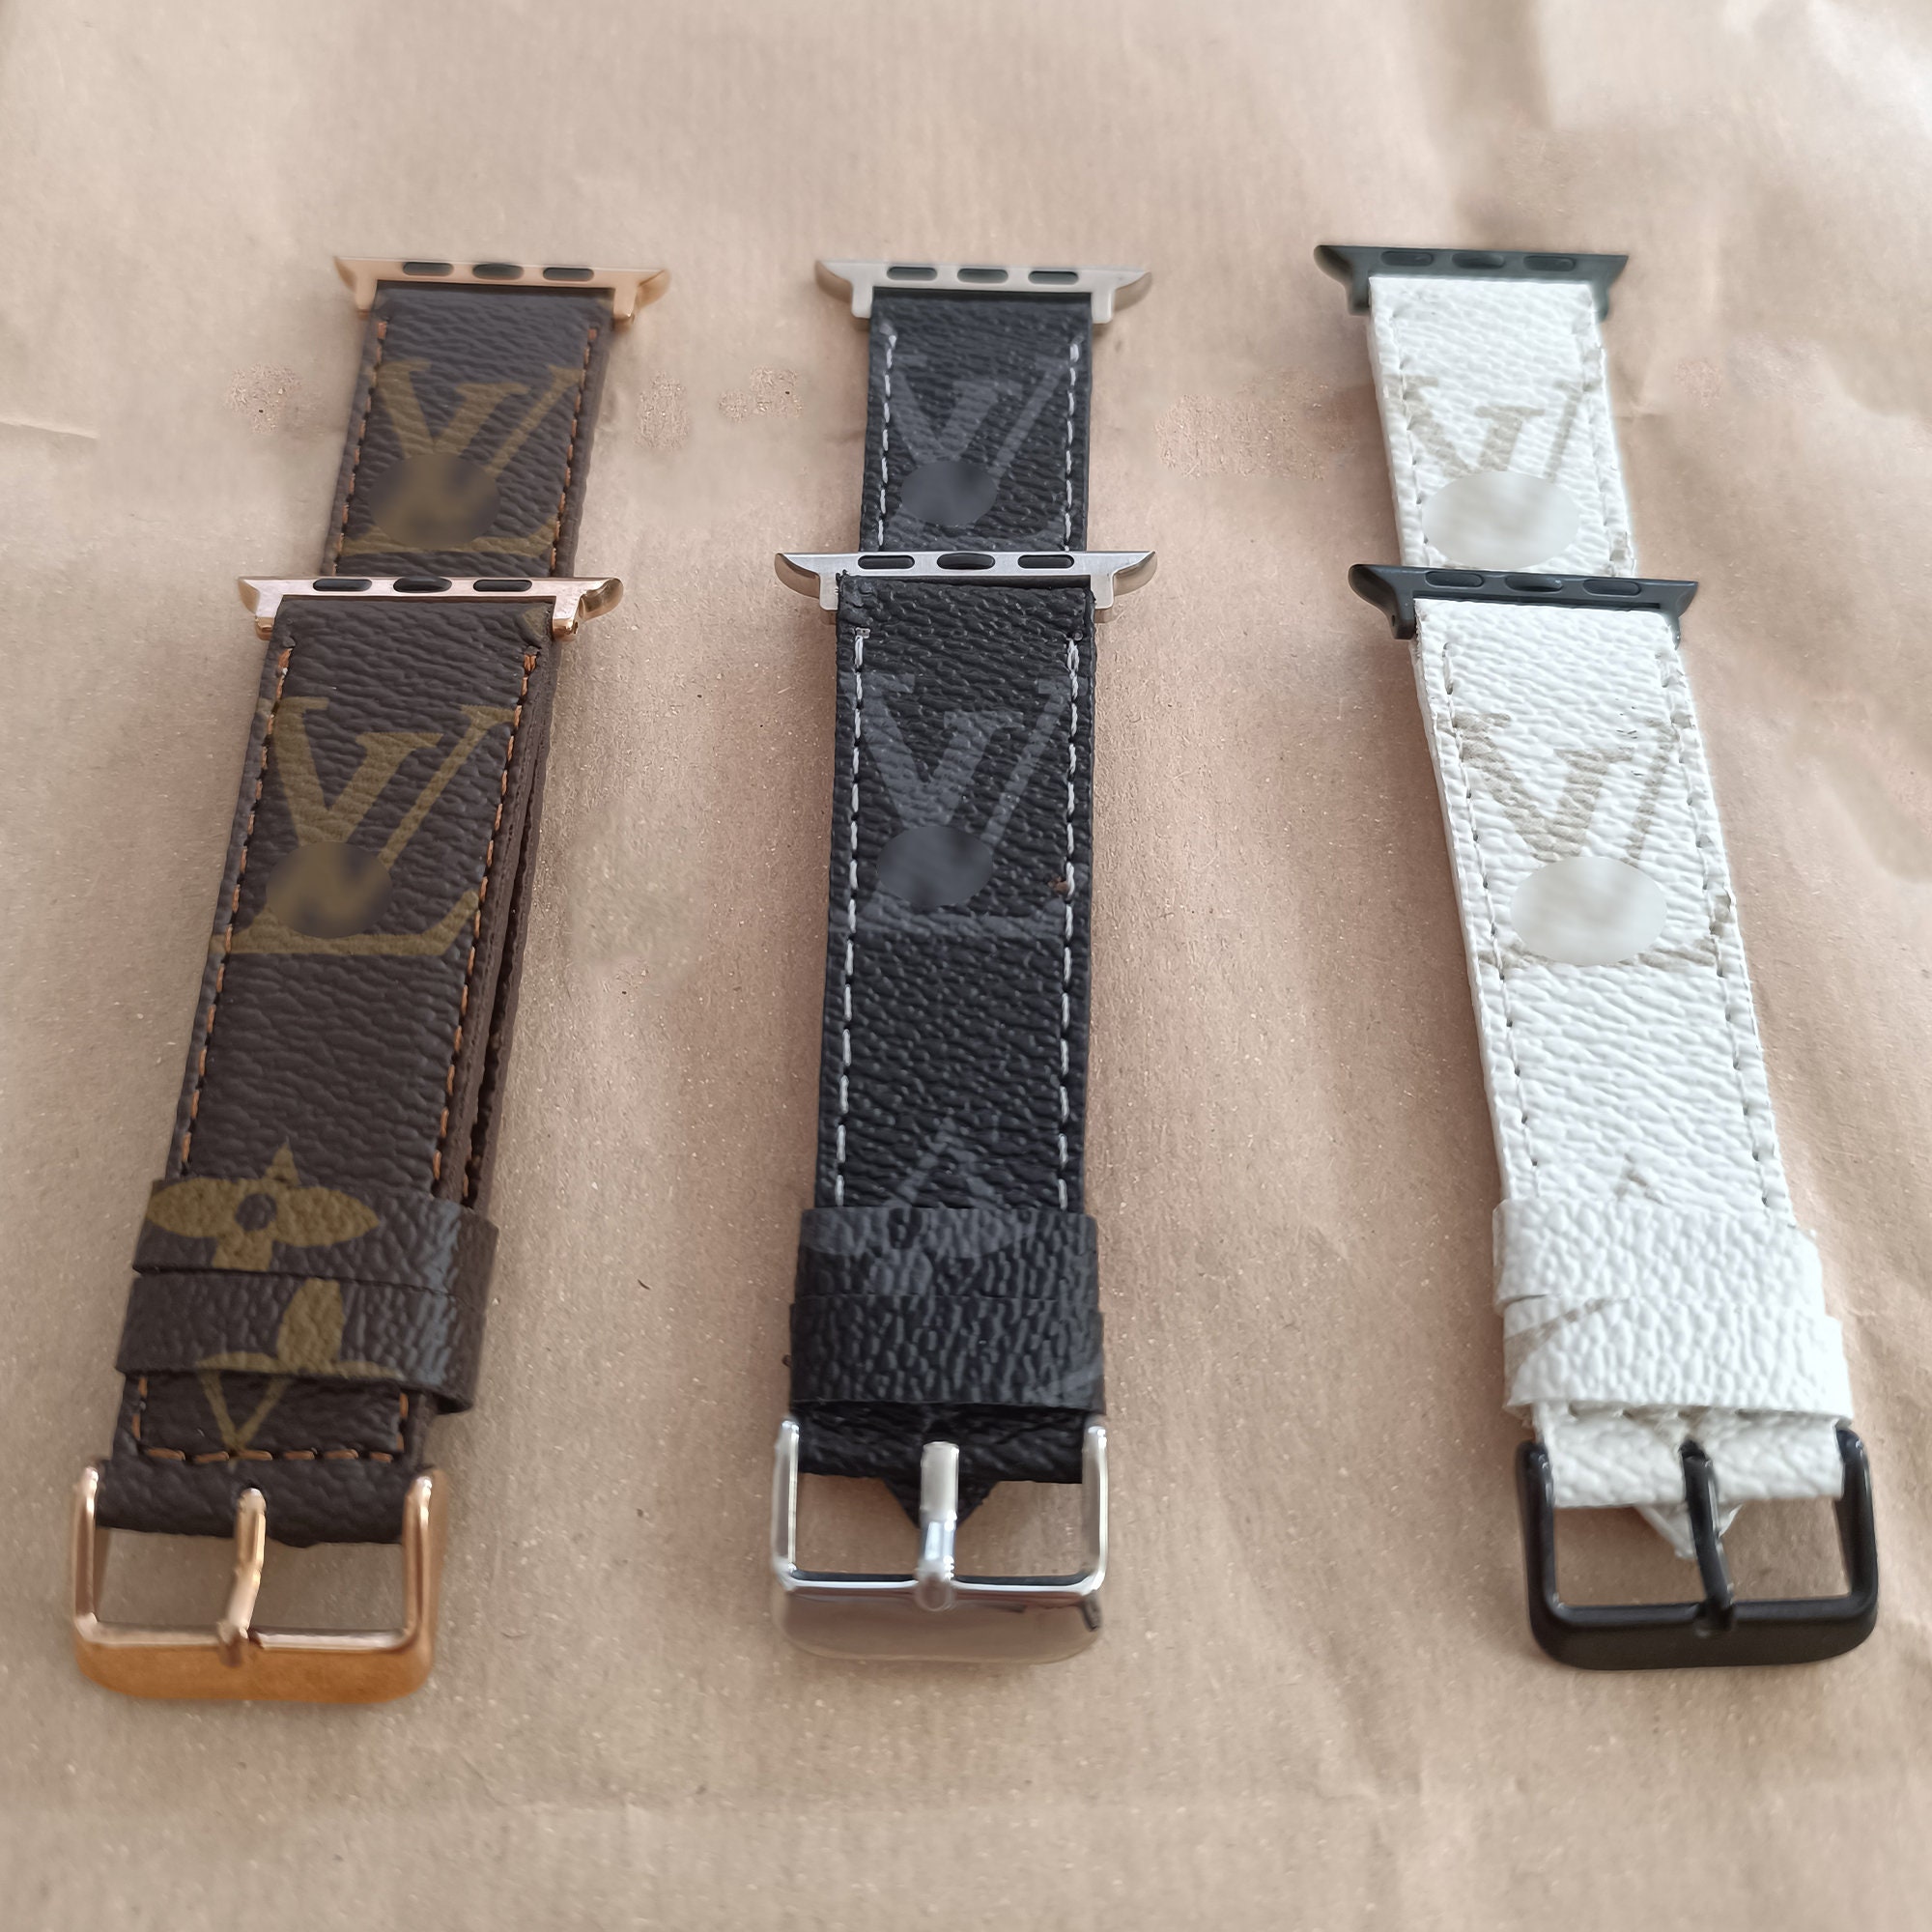 Buy Authentic Louis Vuitton Apple Watch Band Online In India -  India